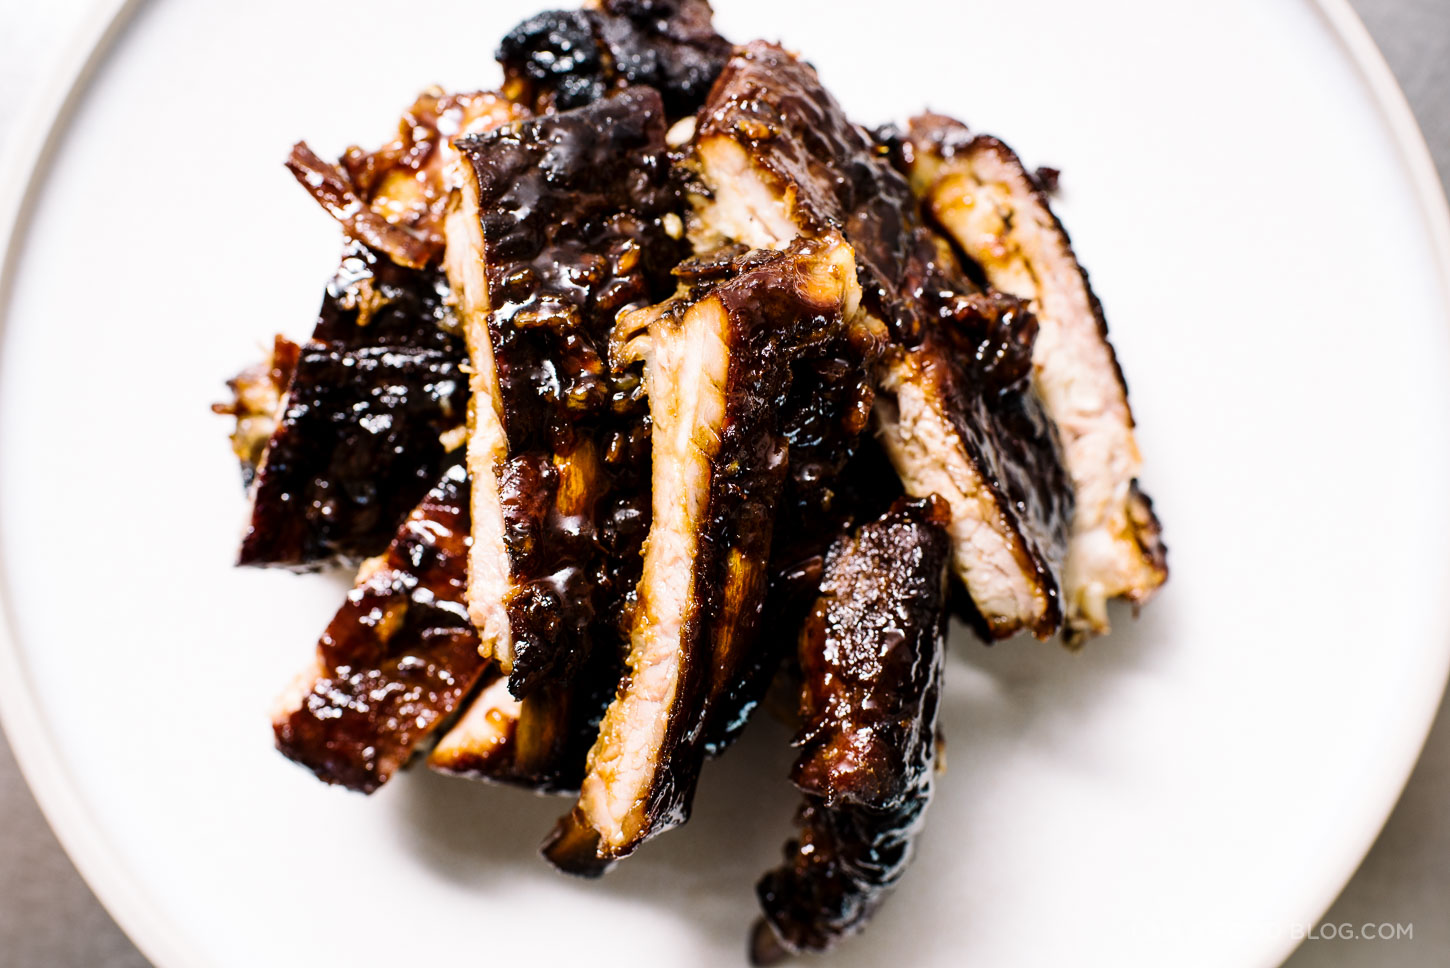 slow cooked ribs recipe - www.iamafoodblog.com